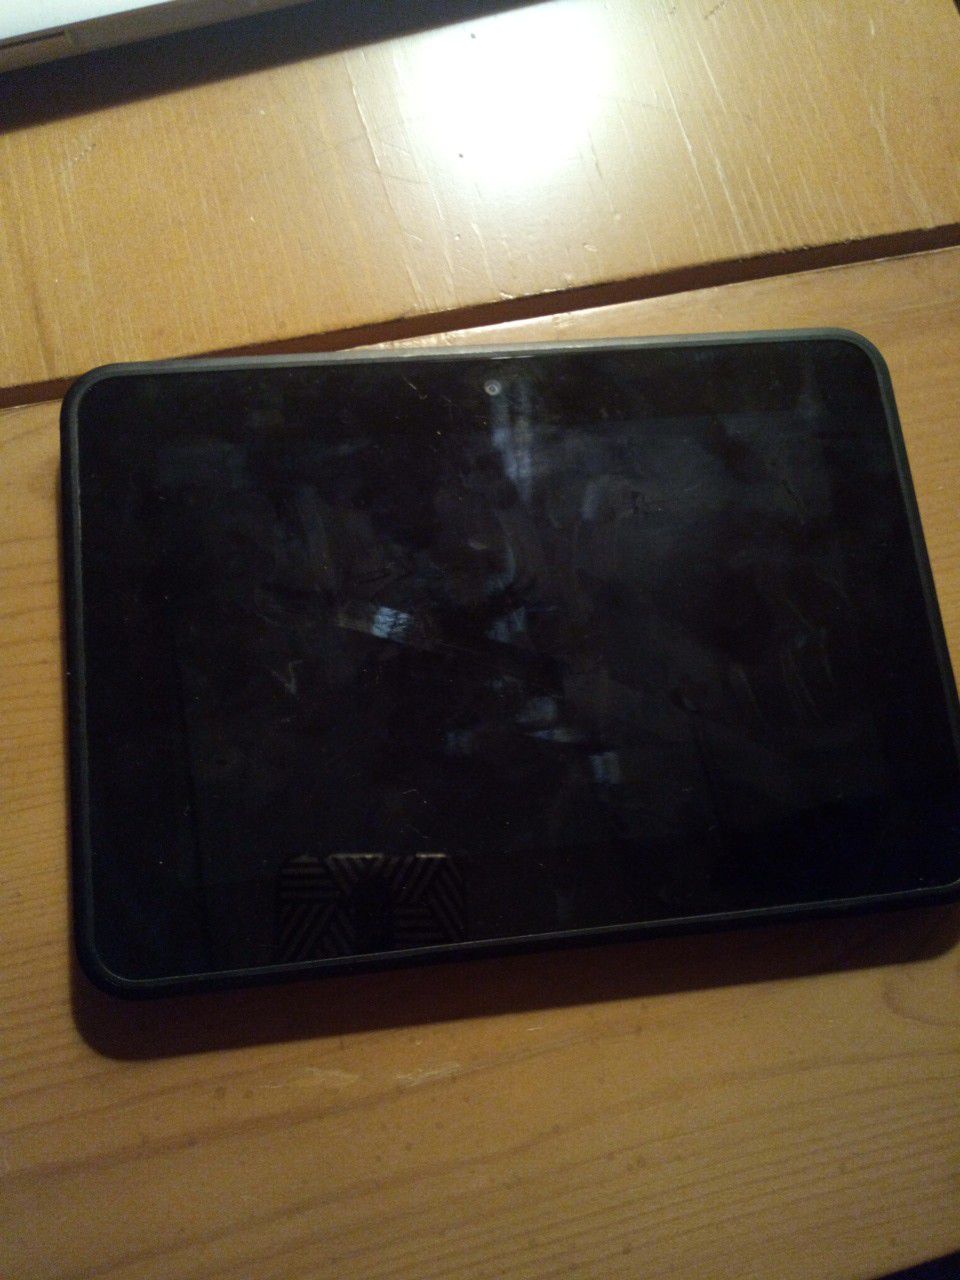 Kindle fire works great